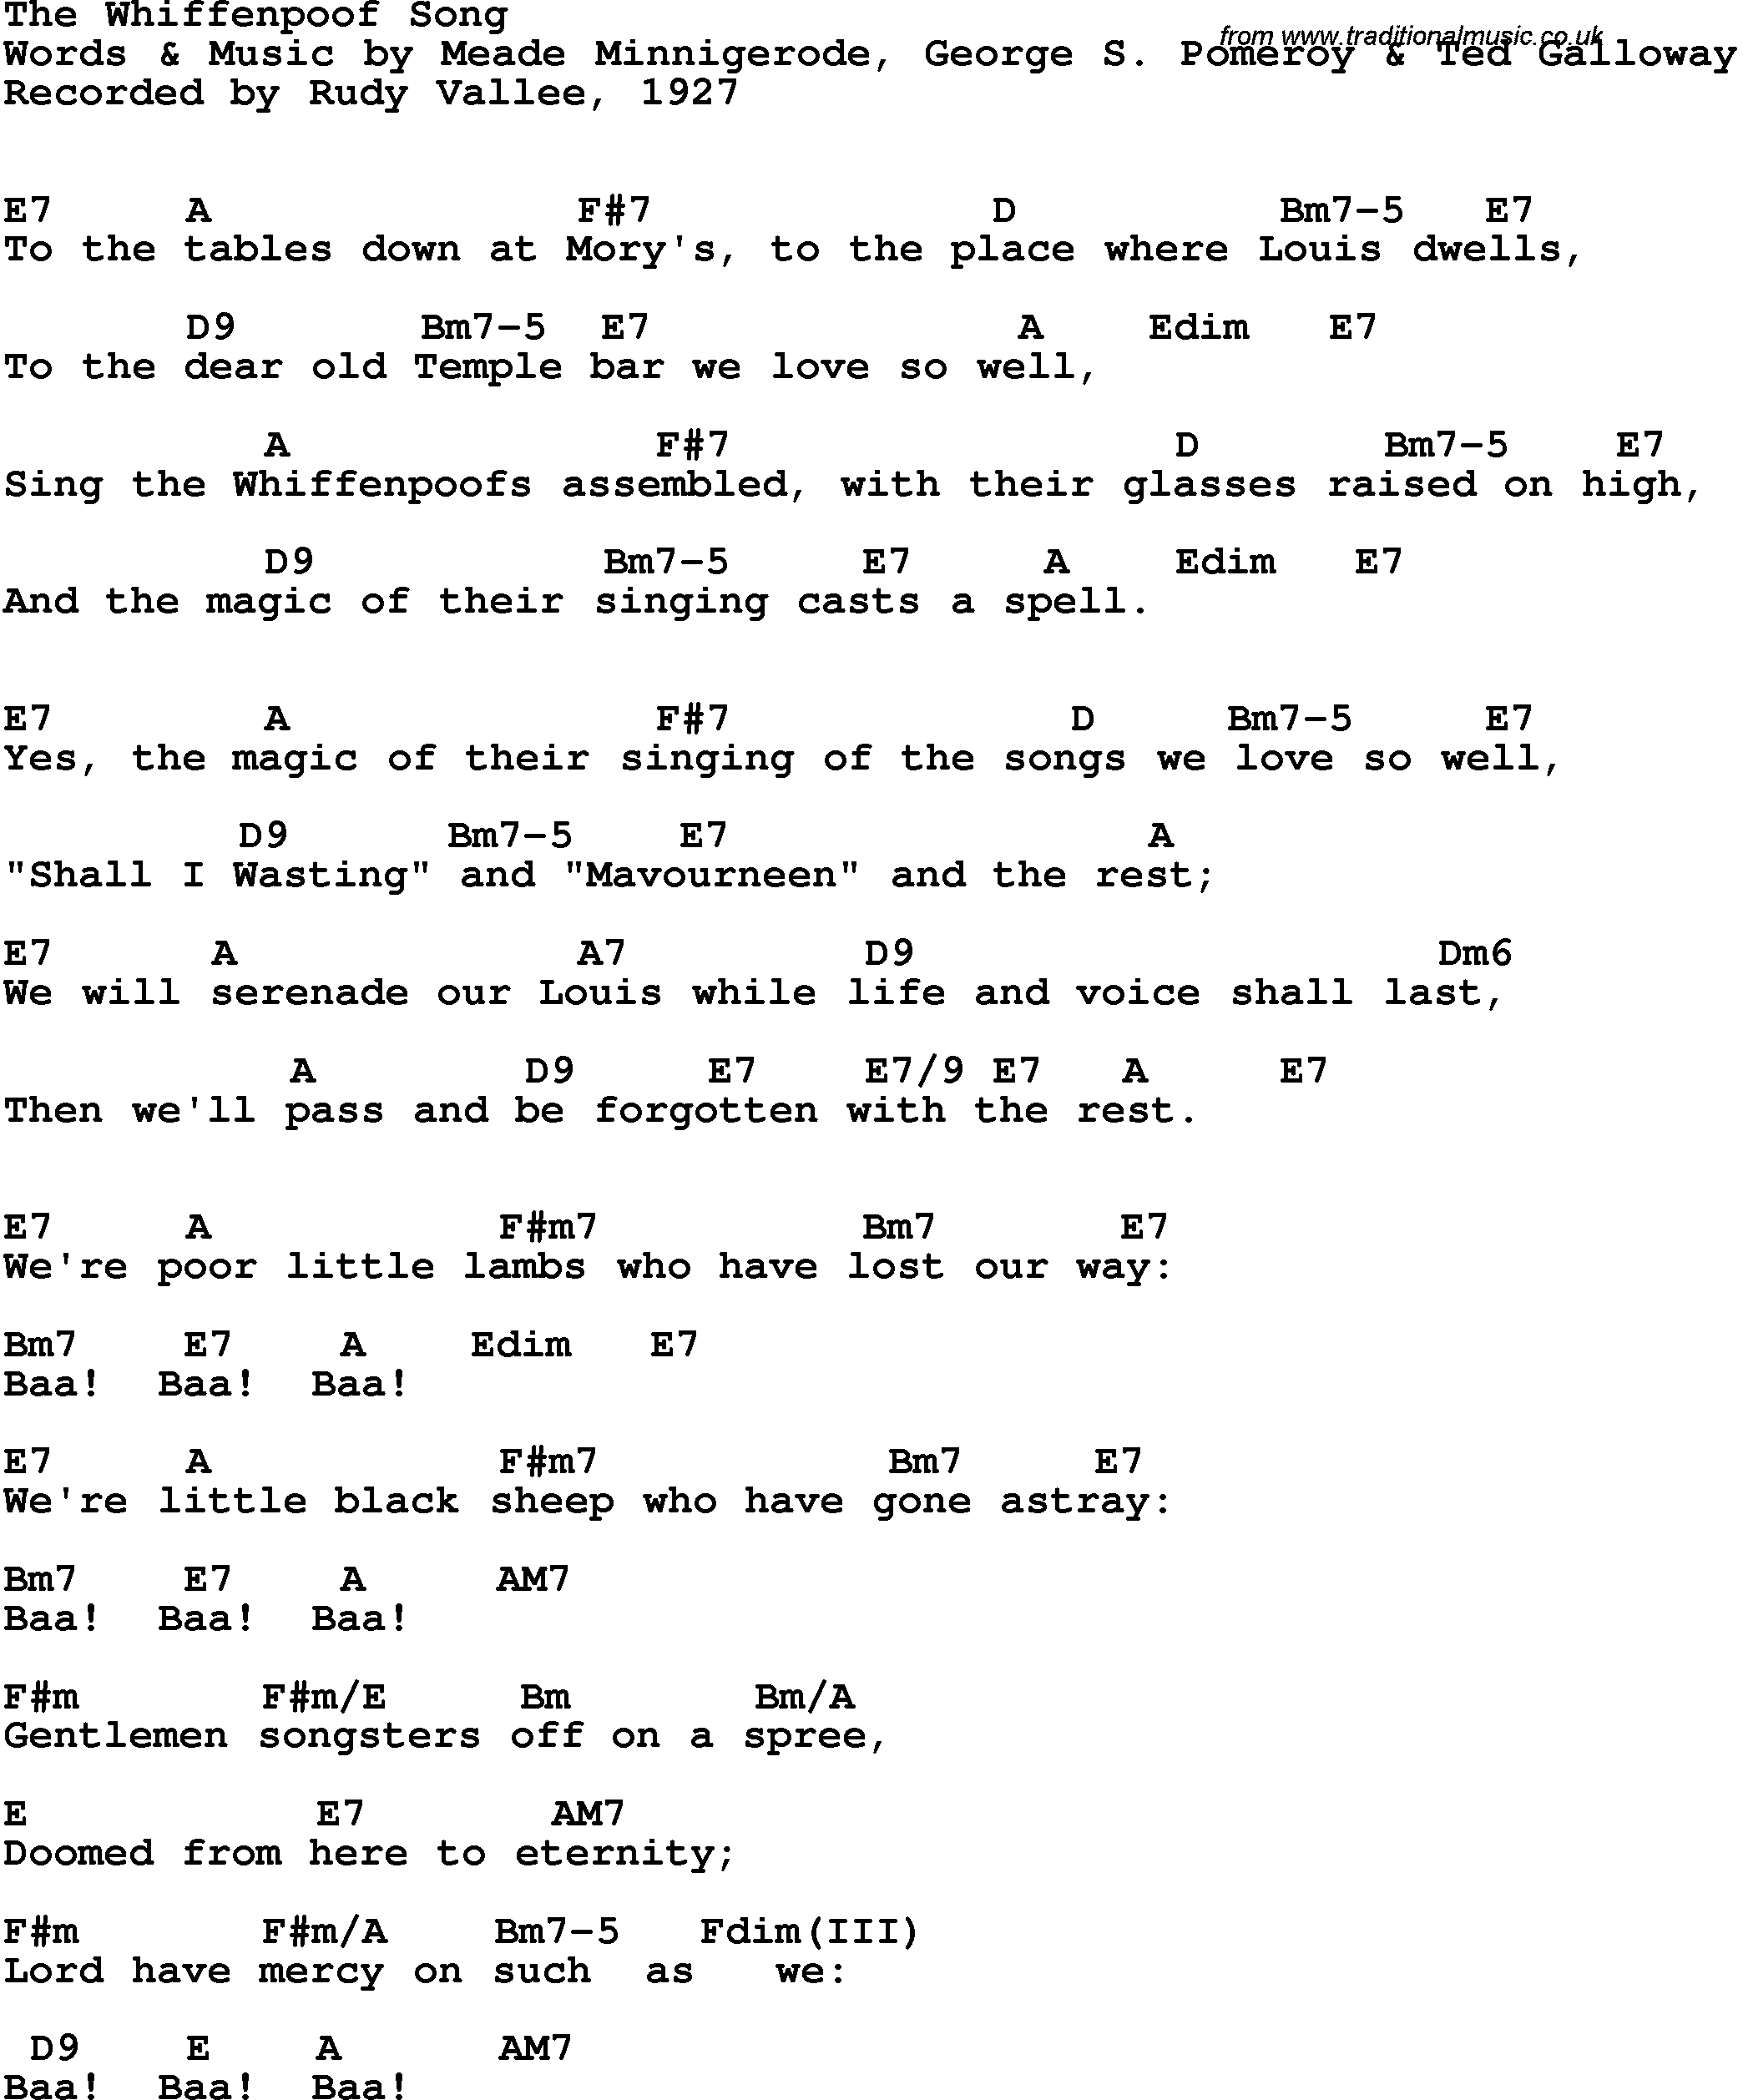 Song Lyrics with guitar chords for Whiffenpoof Song, The - Rudy Vallee, 1927